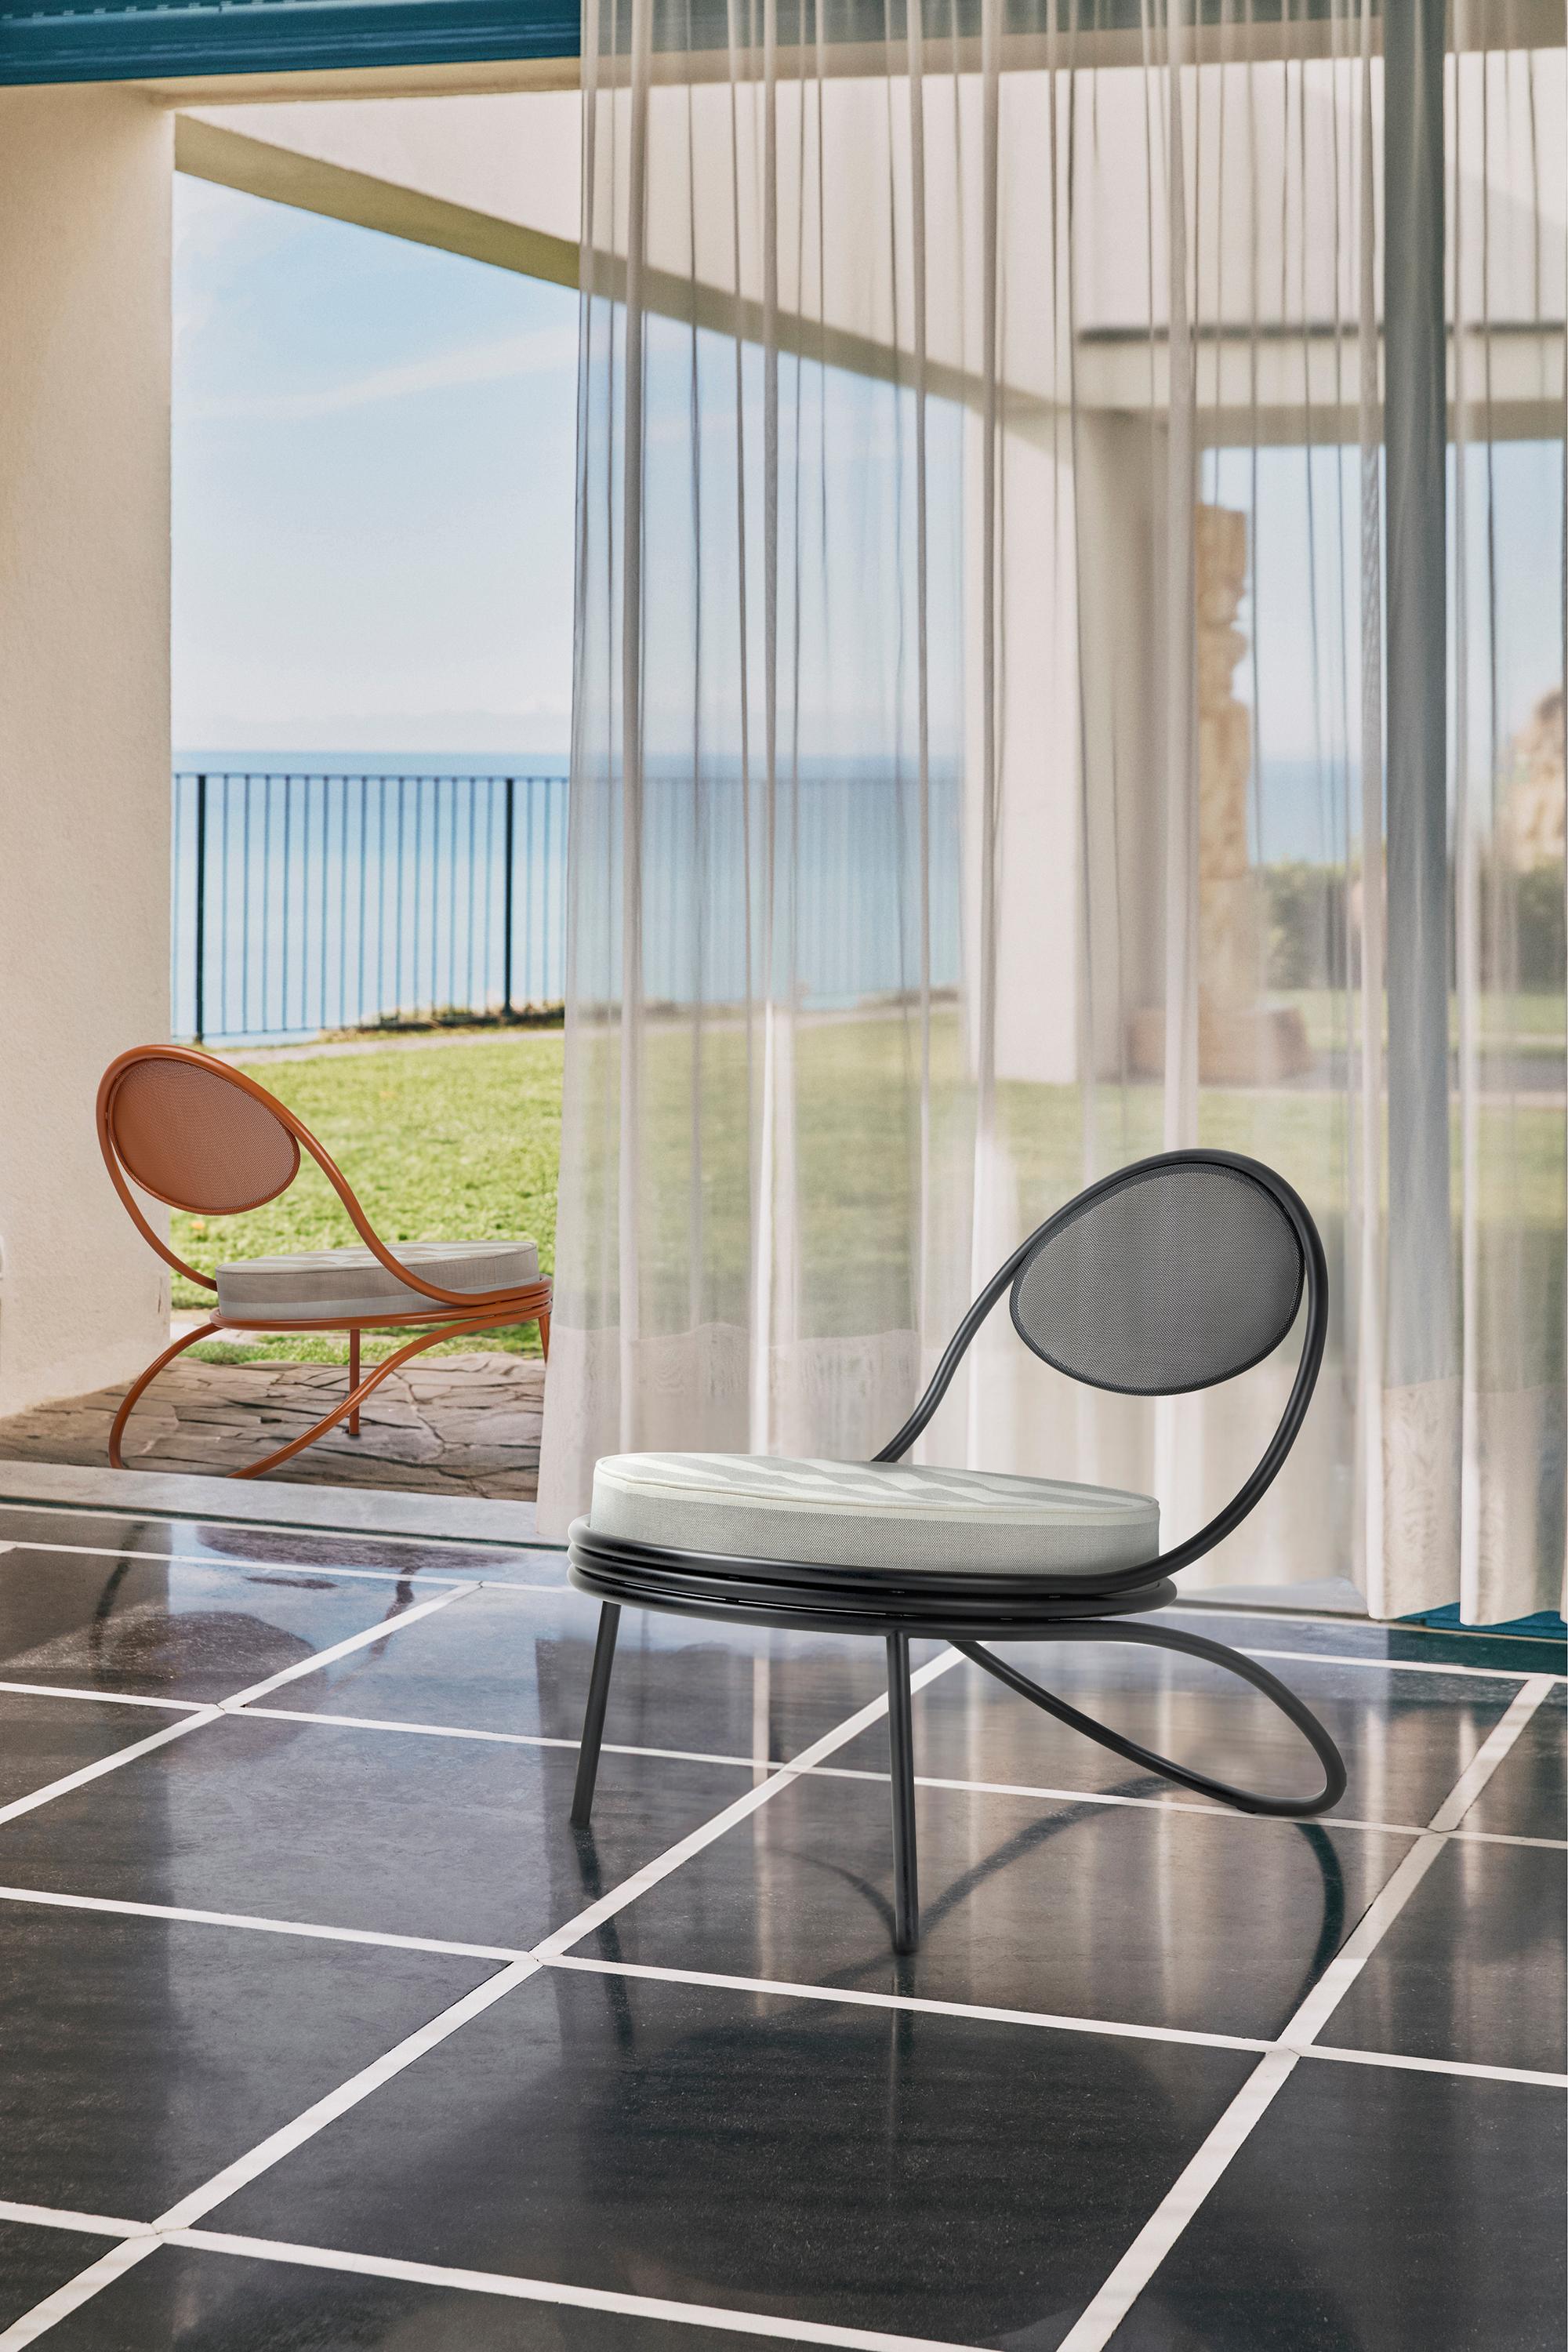 'Copacabana' Indoor Outdoor Lounge Chair by Mathieu Matégot in Lorkey Fabric

A versatile, independent, and self-taught Hungarian designer, architect and artist, Mathieu Matégot (1910–2001) first learned about the techniques and potential of sheet